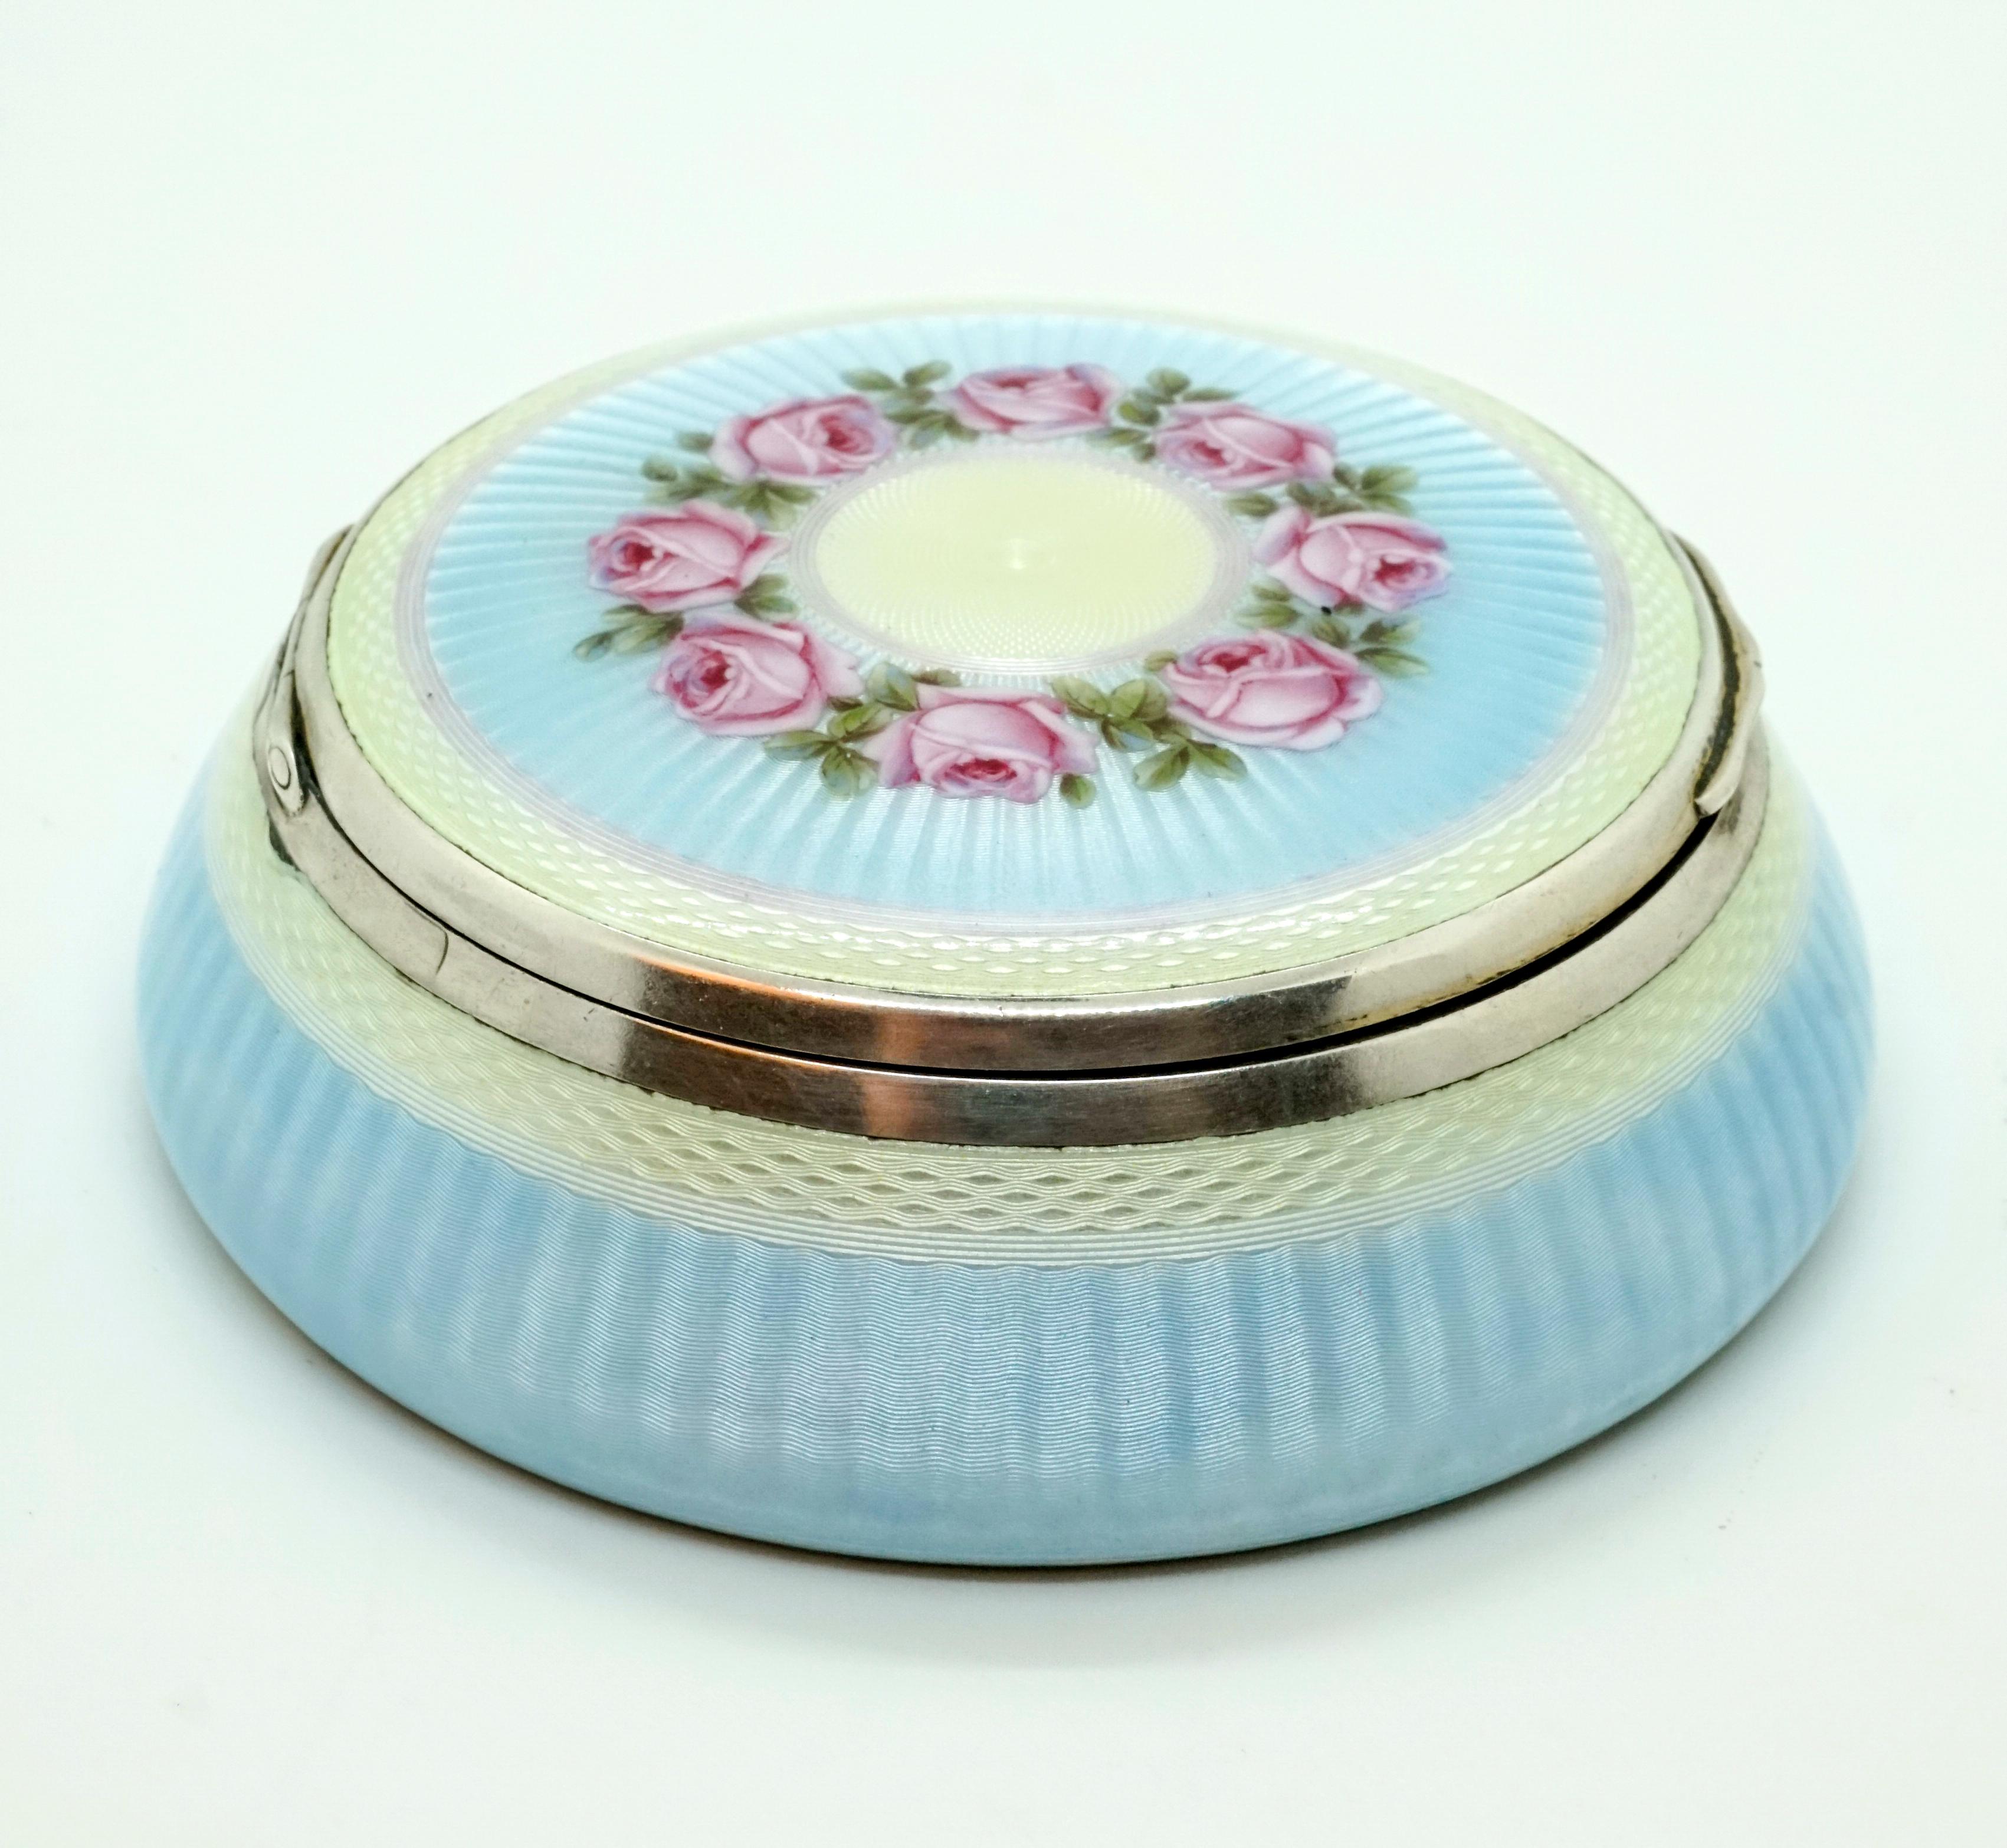 Enameled Art Nouveau Silver Guilloche-Enamel Box with Delicate Rose Painting, circa 1900